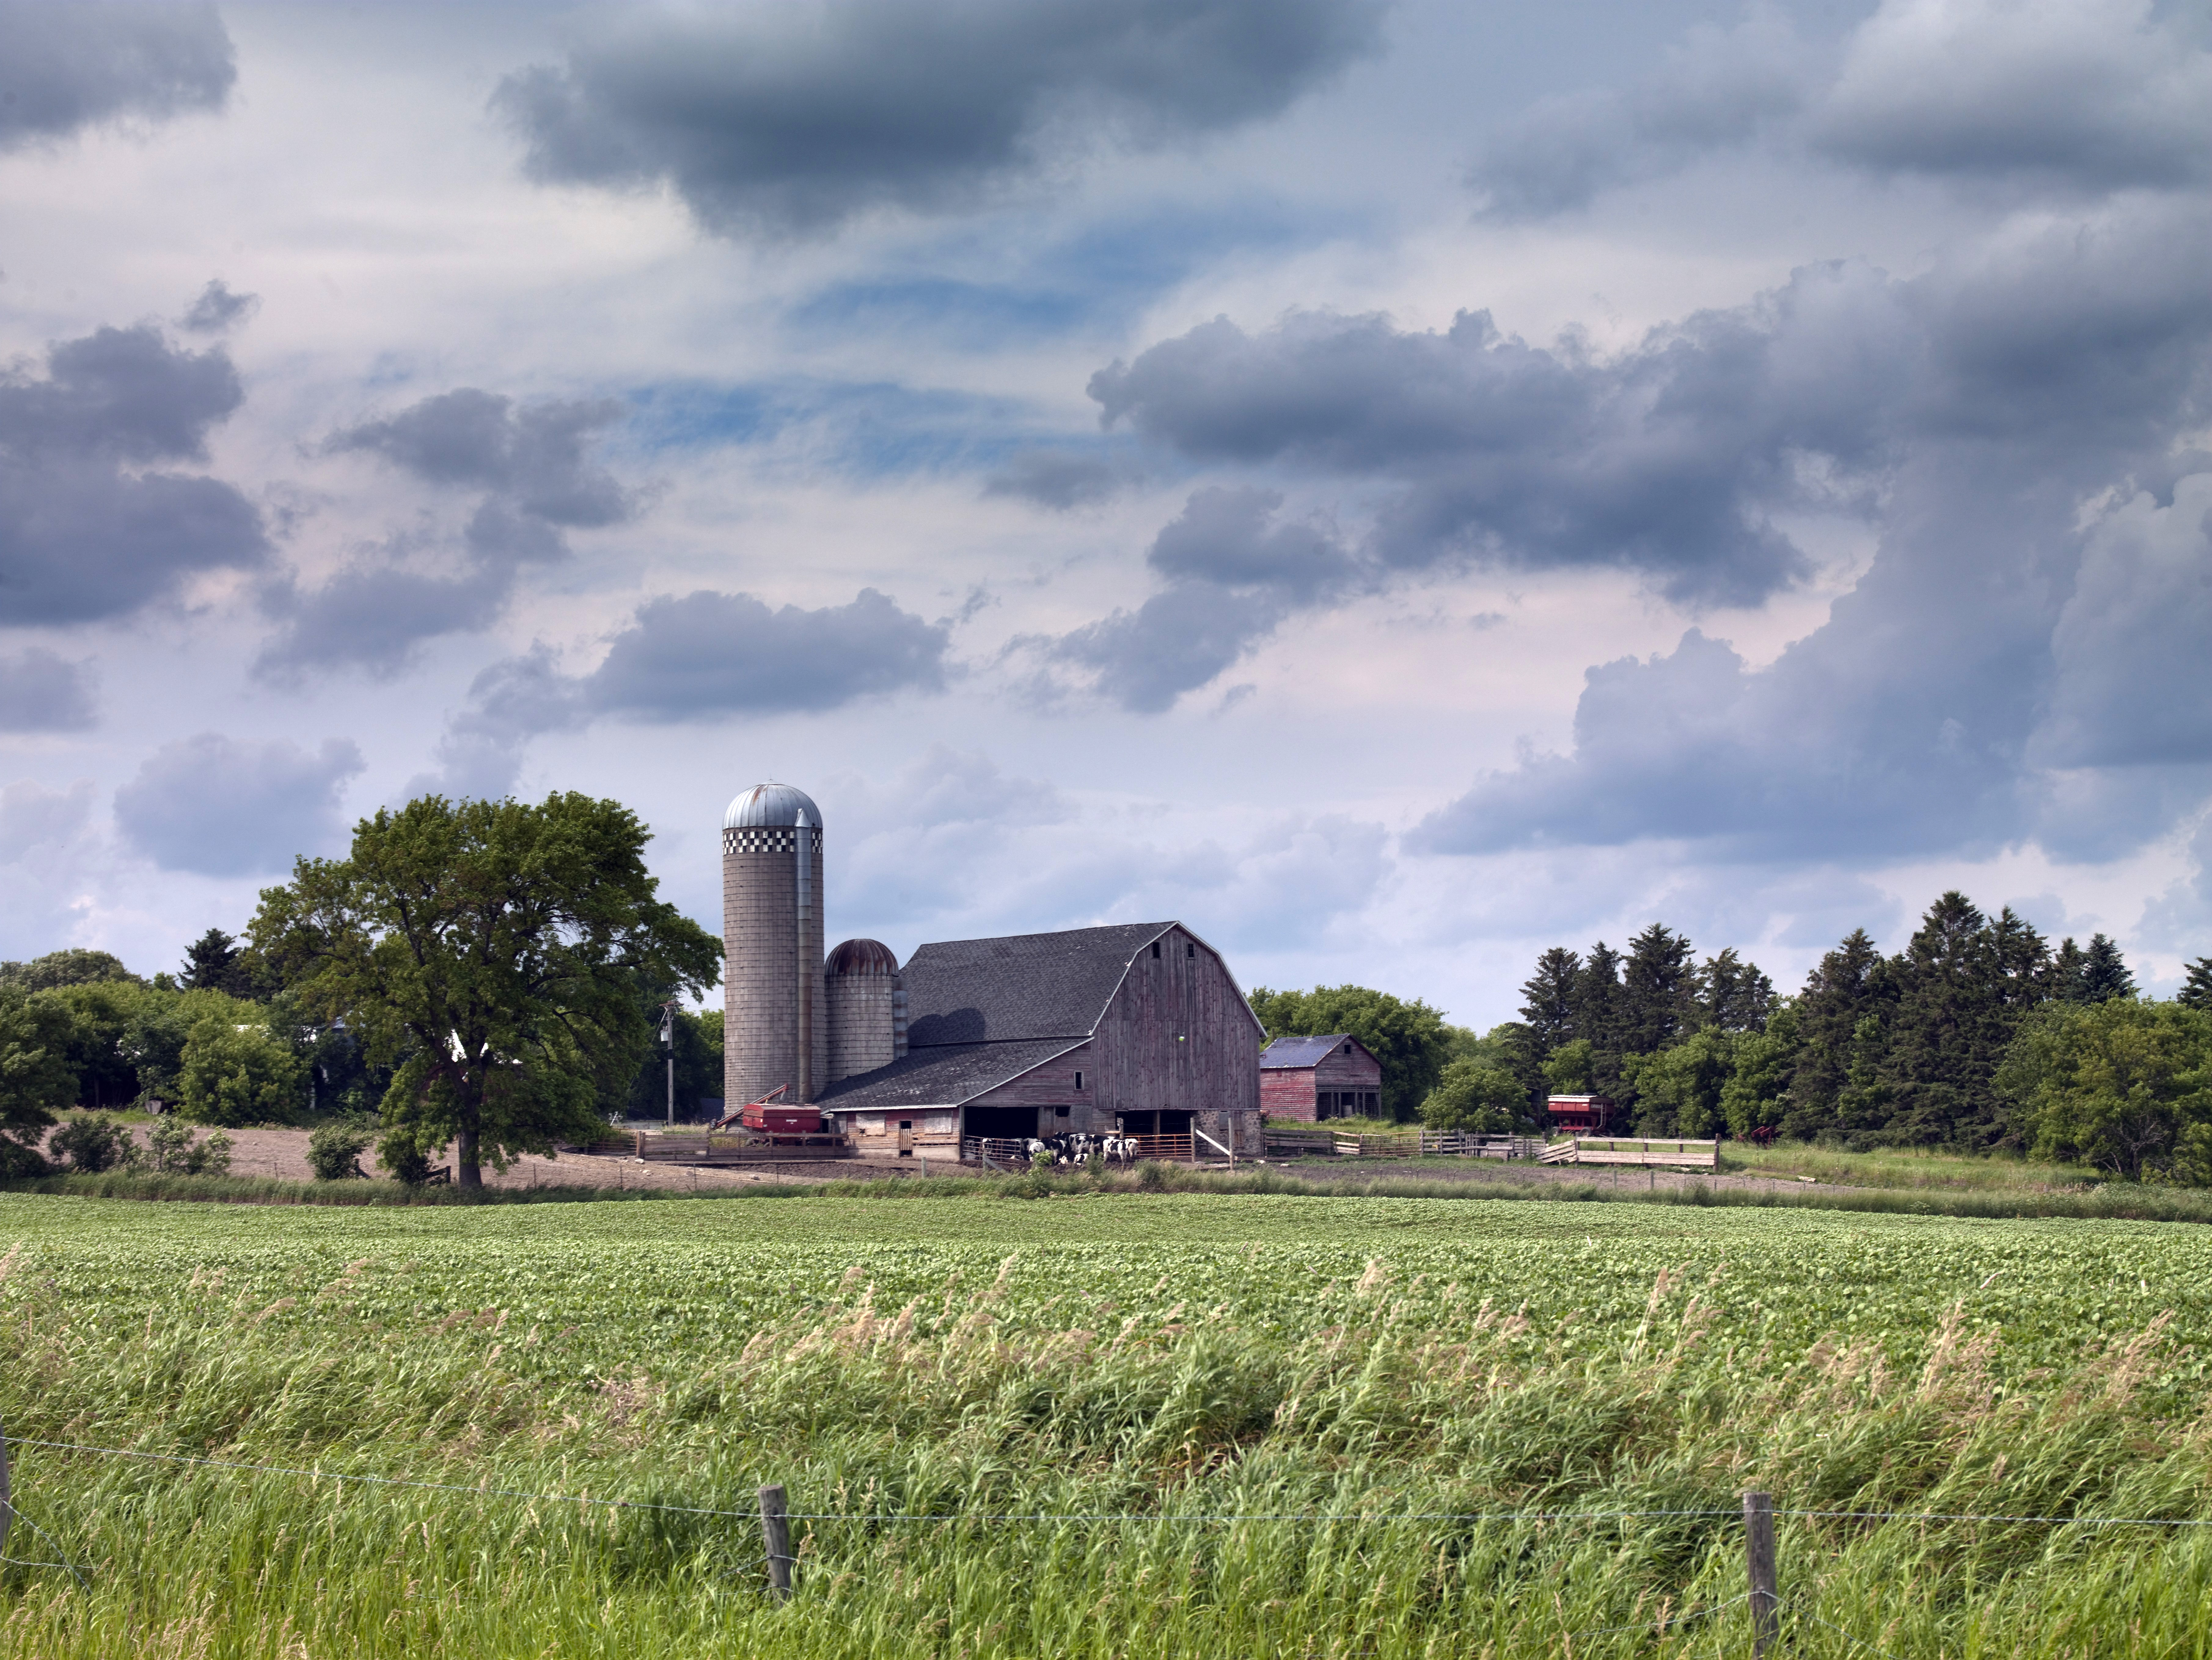 Farmhouse and farm under clouds in North Dakota image - Free stock ...